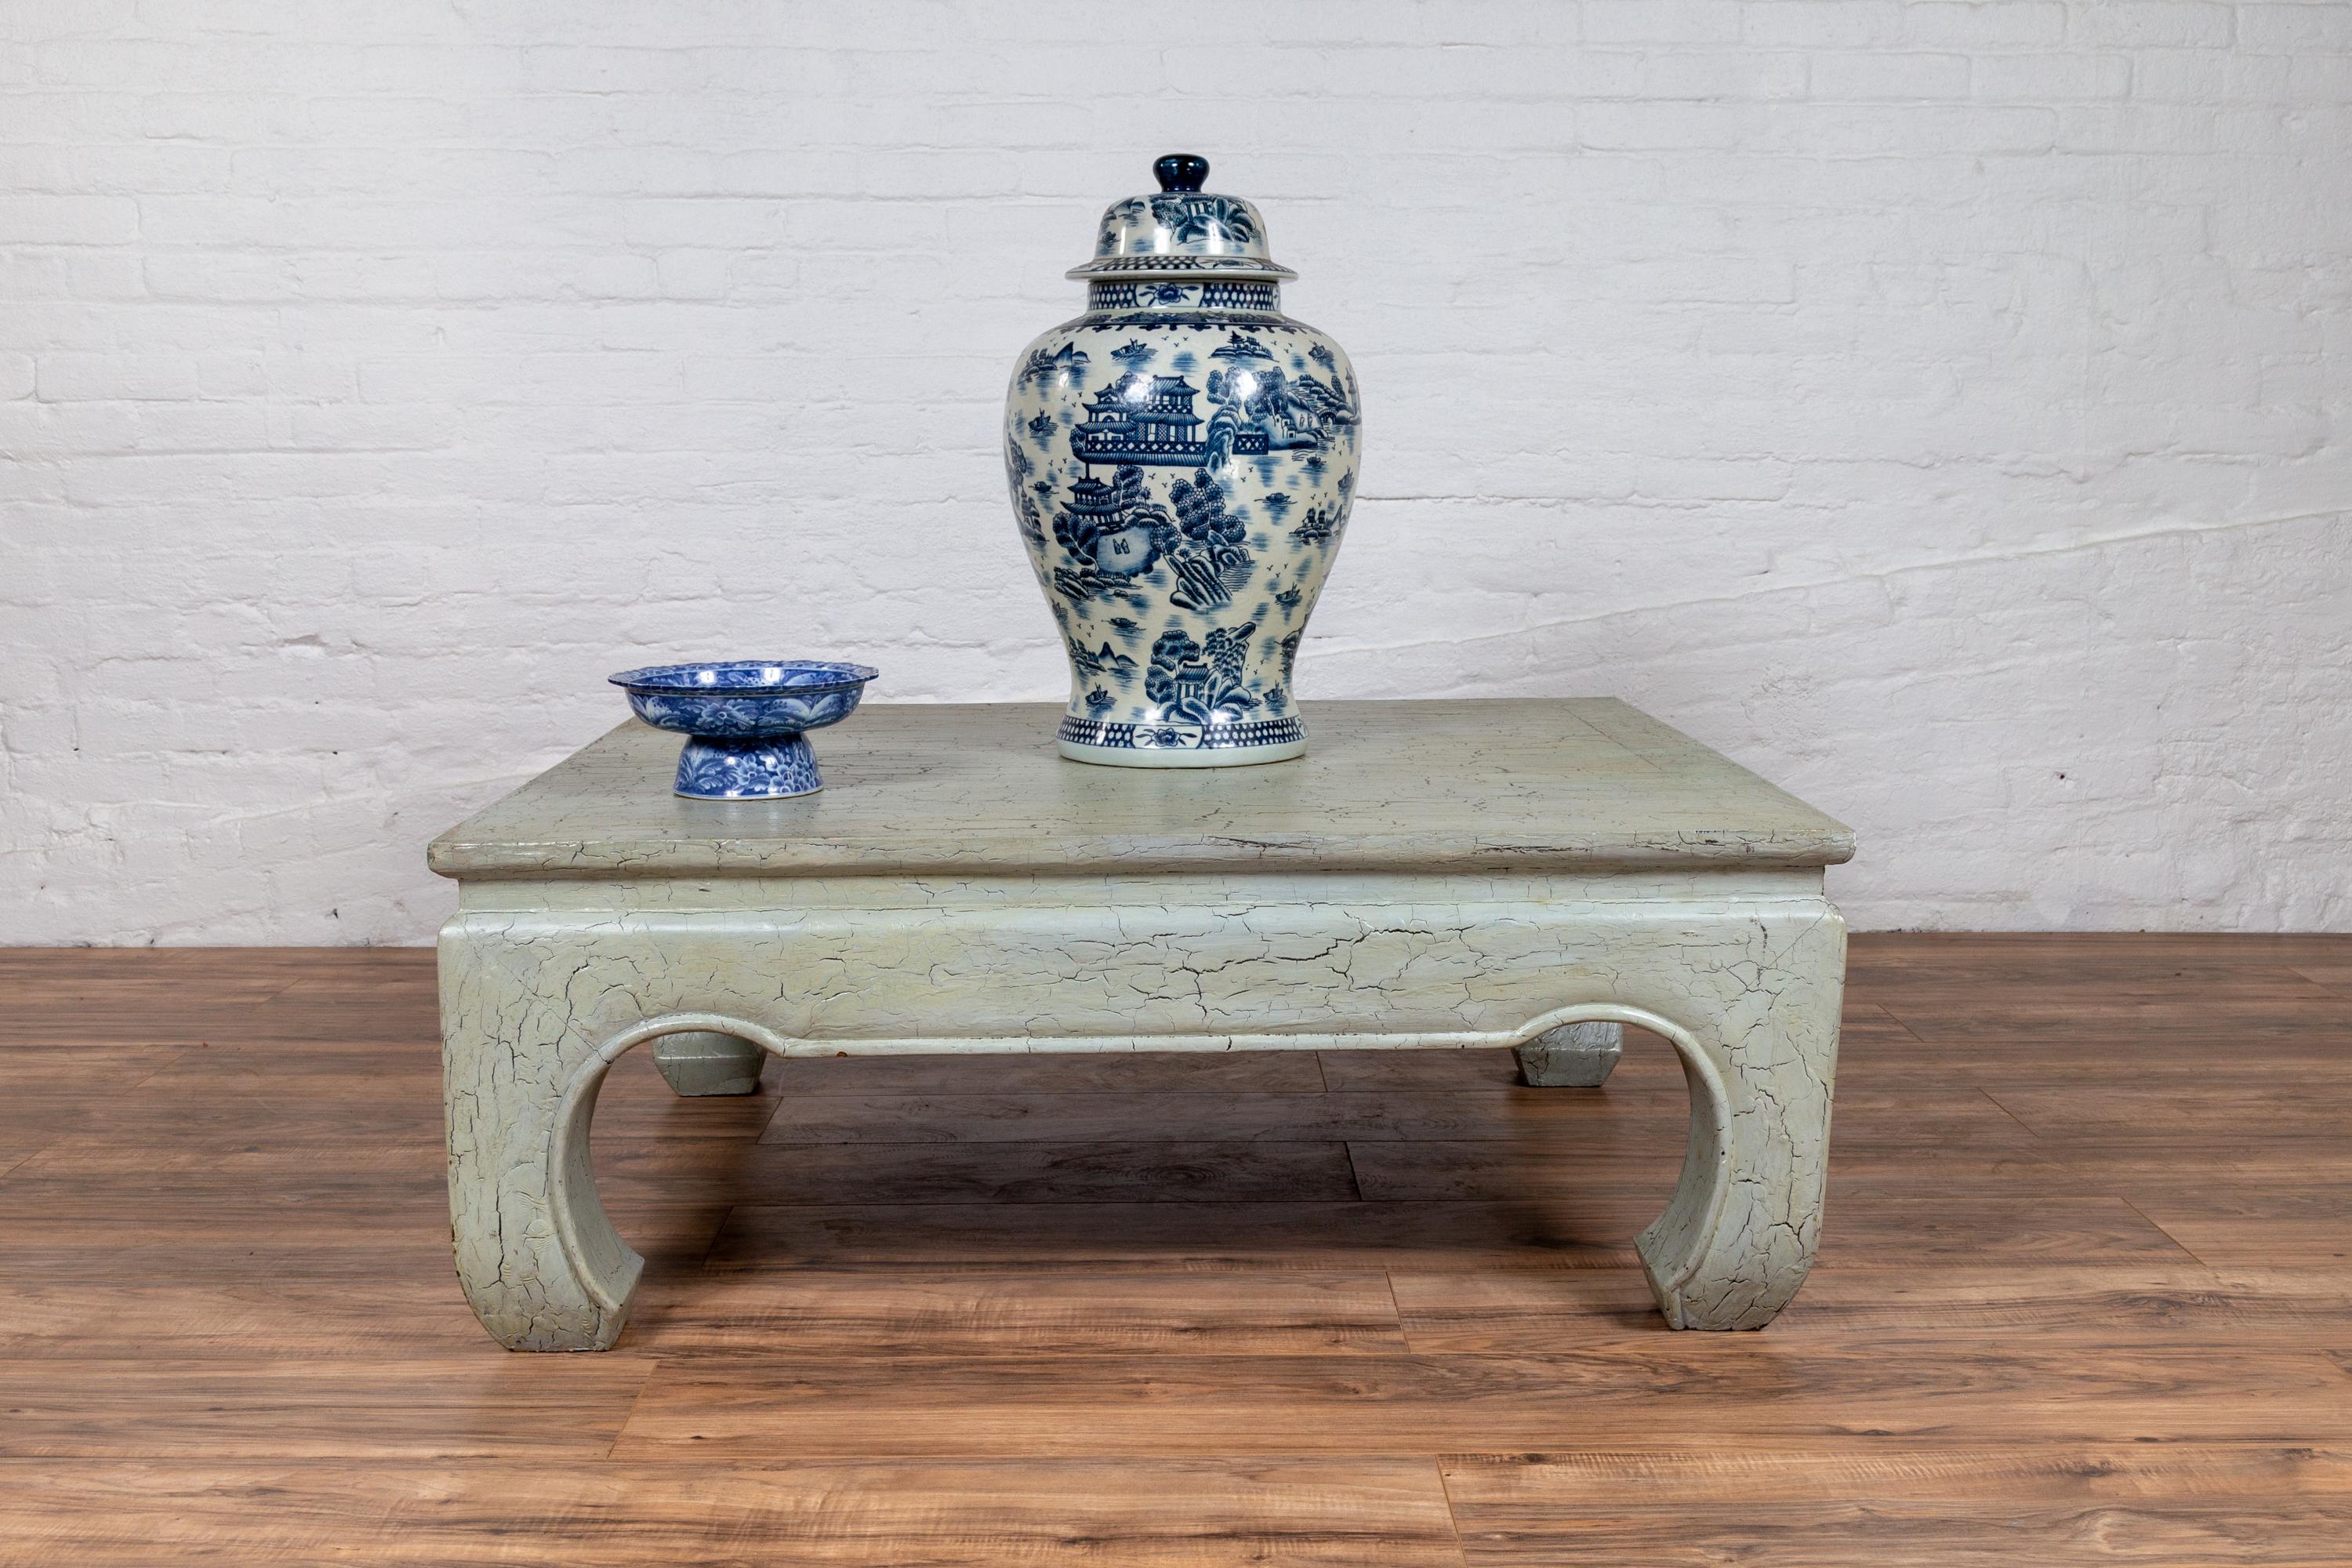 A Thai vintage wooden coffee table from the mid-20th century, with mint green crackled finish and chow legs. Born in Thailand during the midcentury period, this charming coffee table attracts our eyes with its distressed mint green finish.